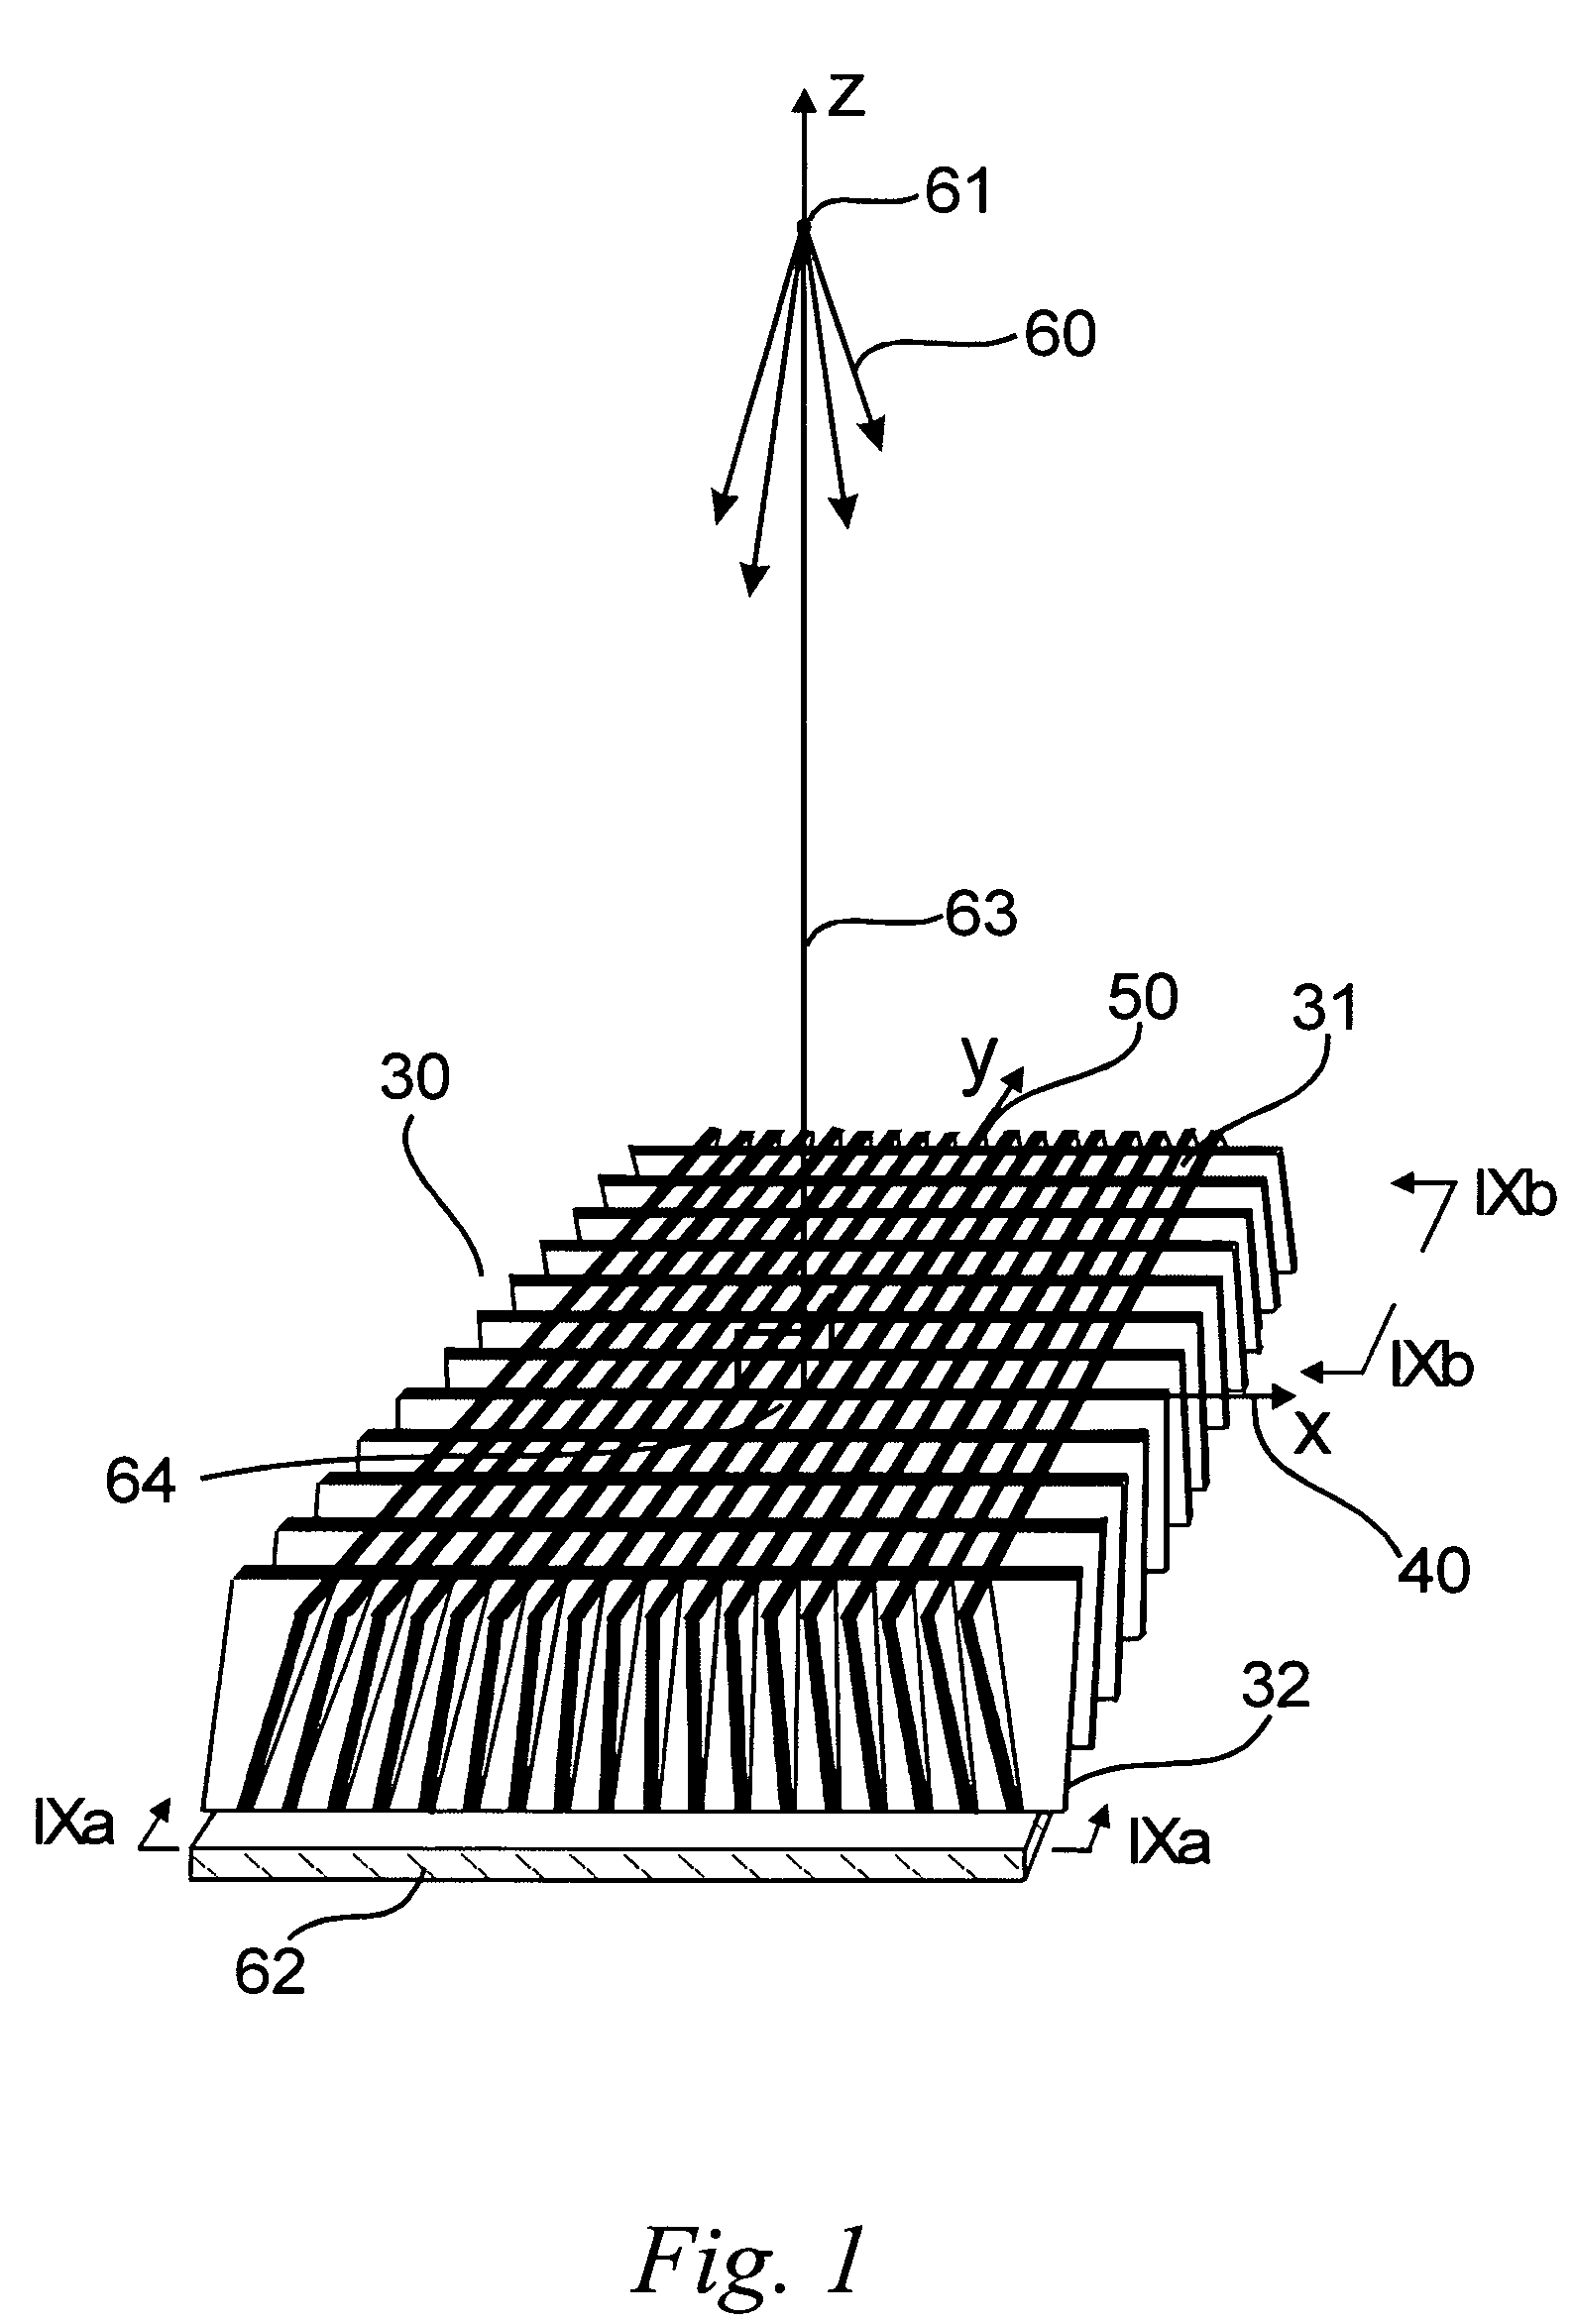 Anti-scatter grid and collimator designs, and their motion, fabrication and assembly